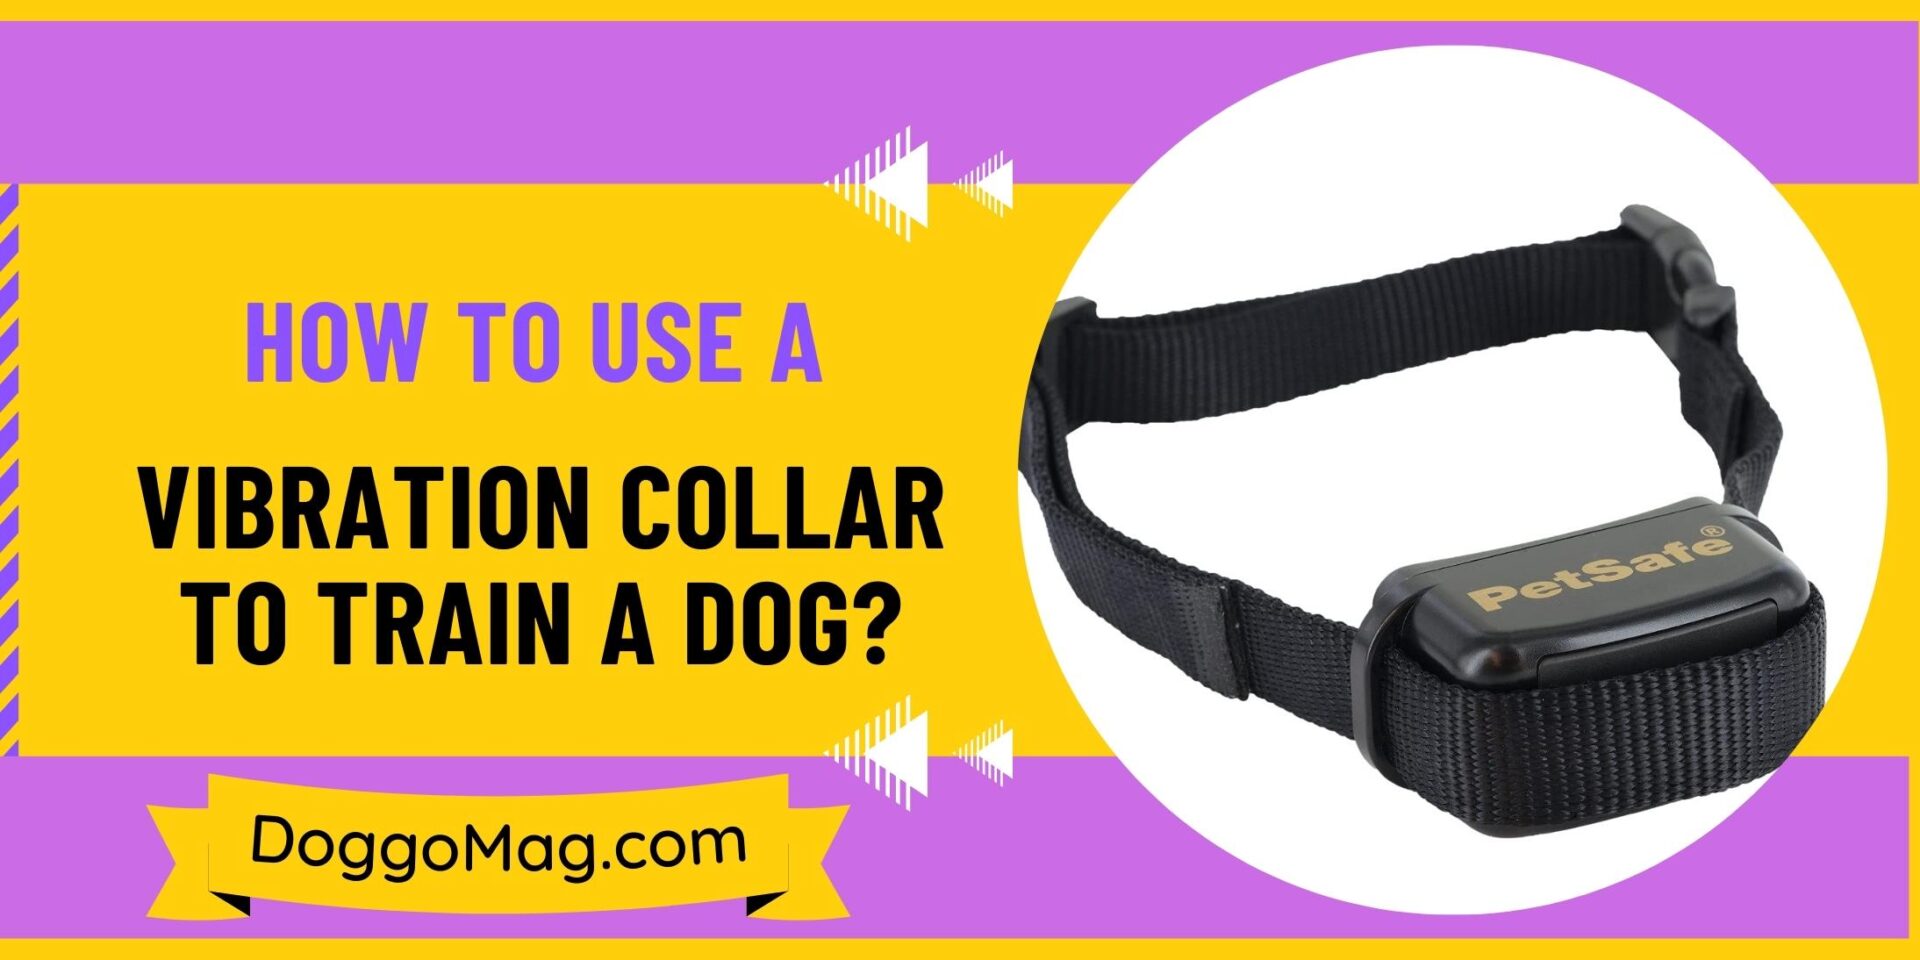 How To Use A Vibration Collar To Train A Dog